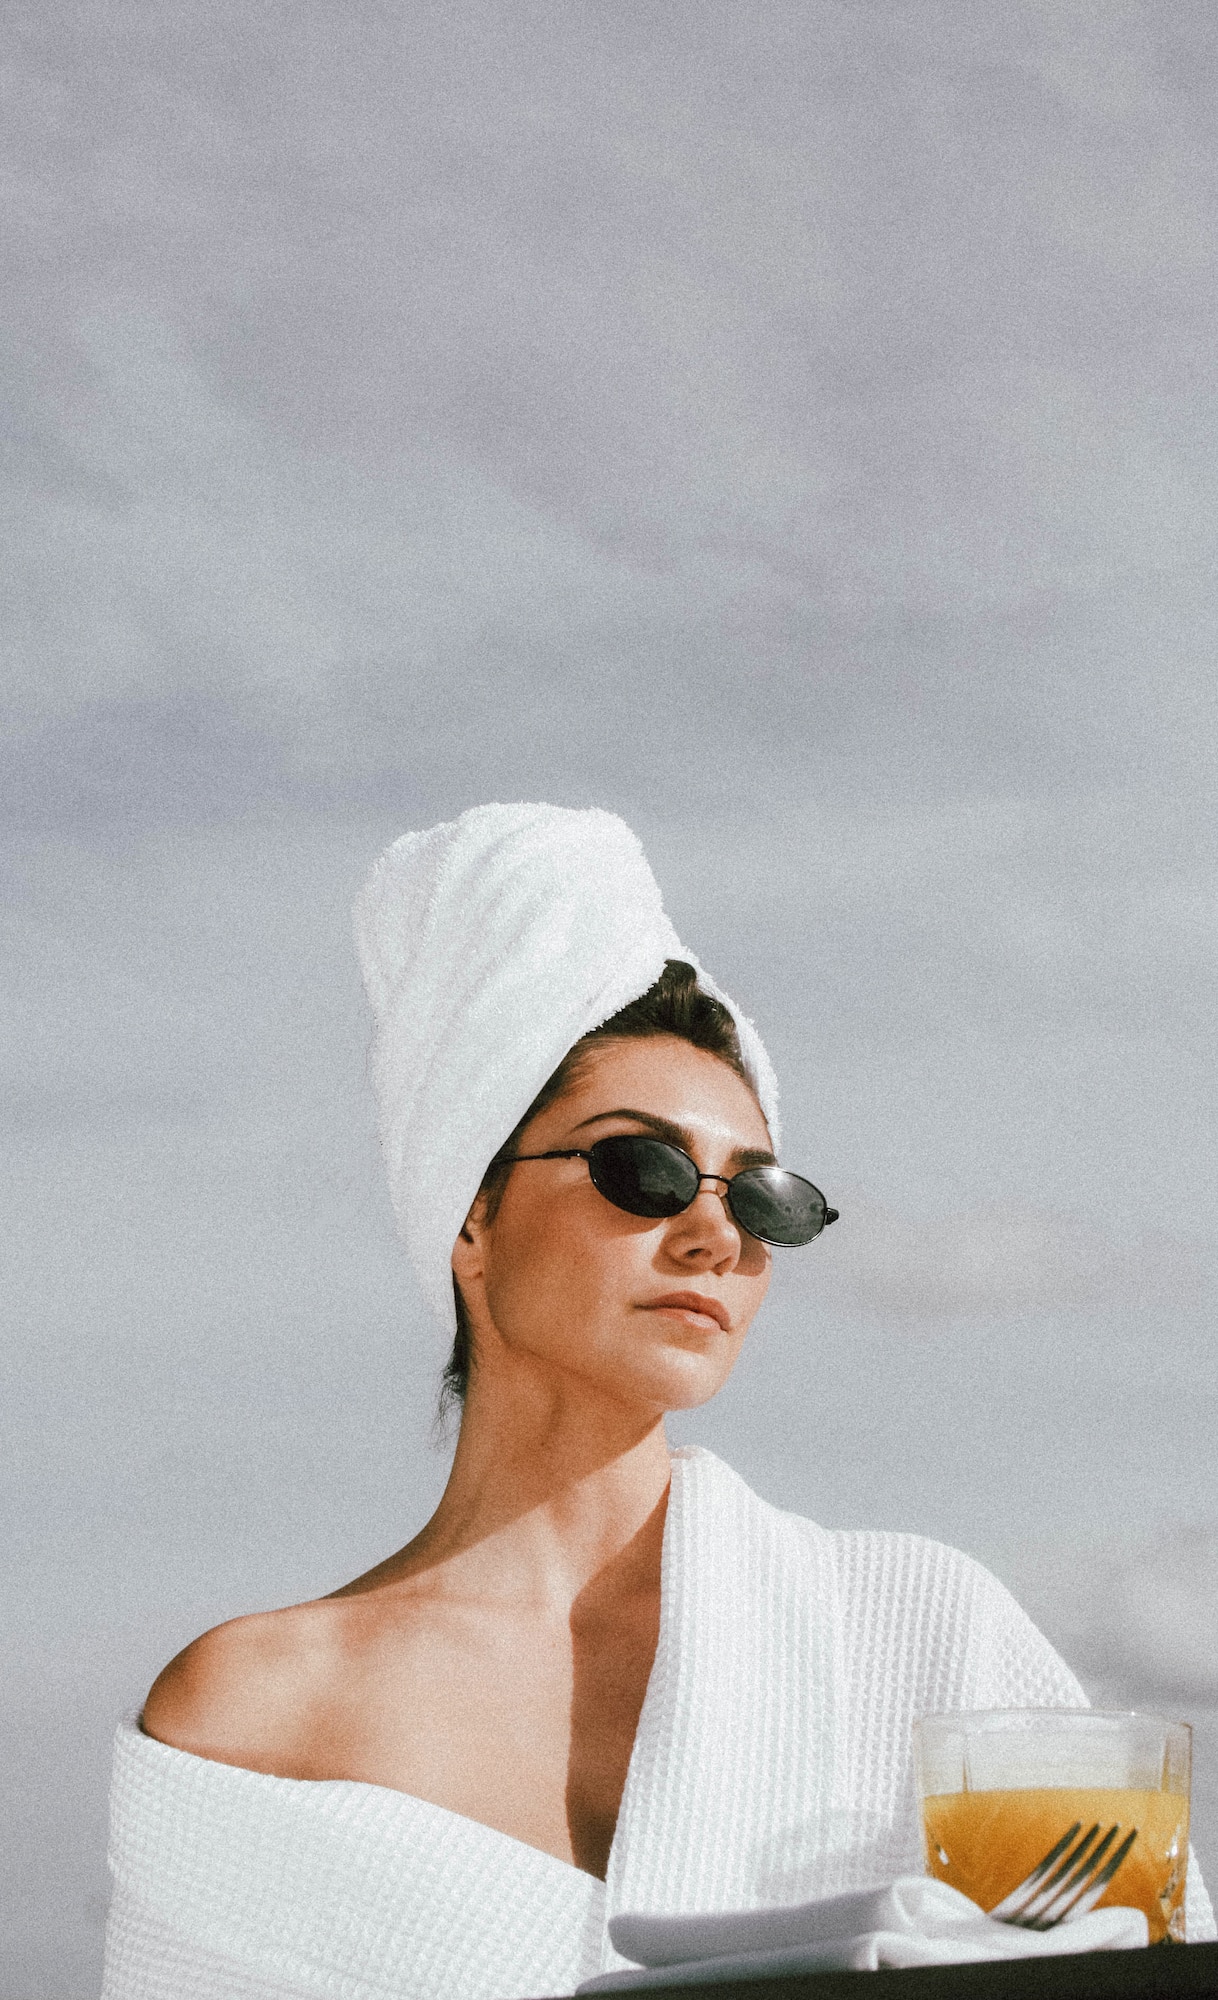 a woman wearing sunglasses and a towel on her head